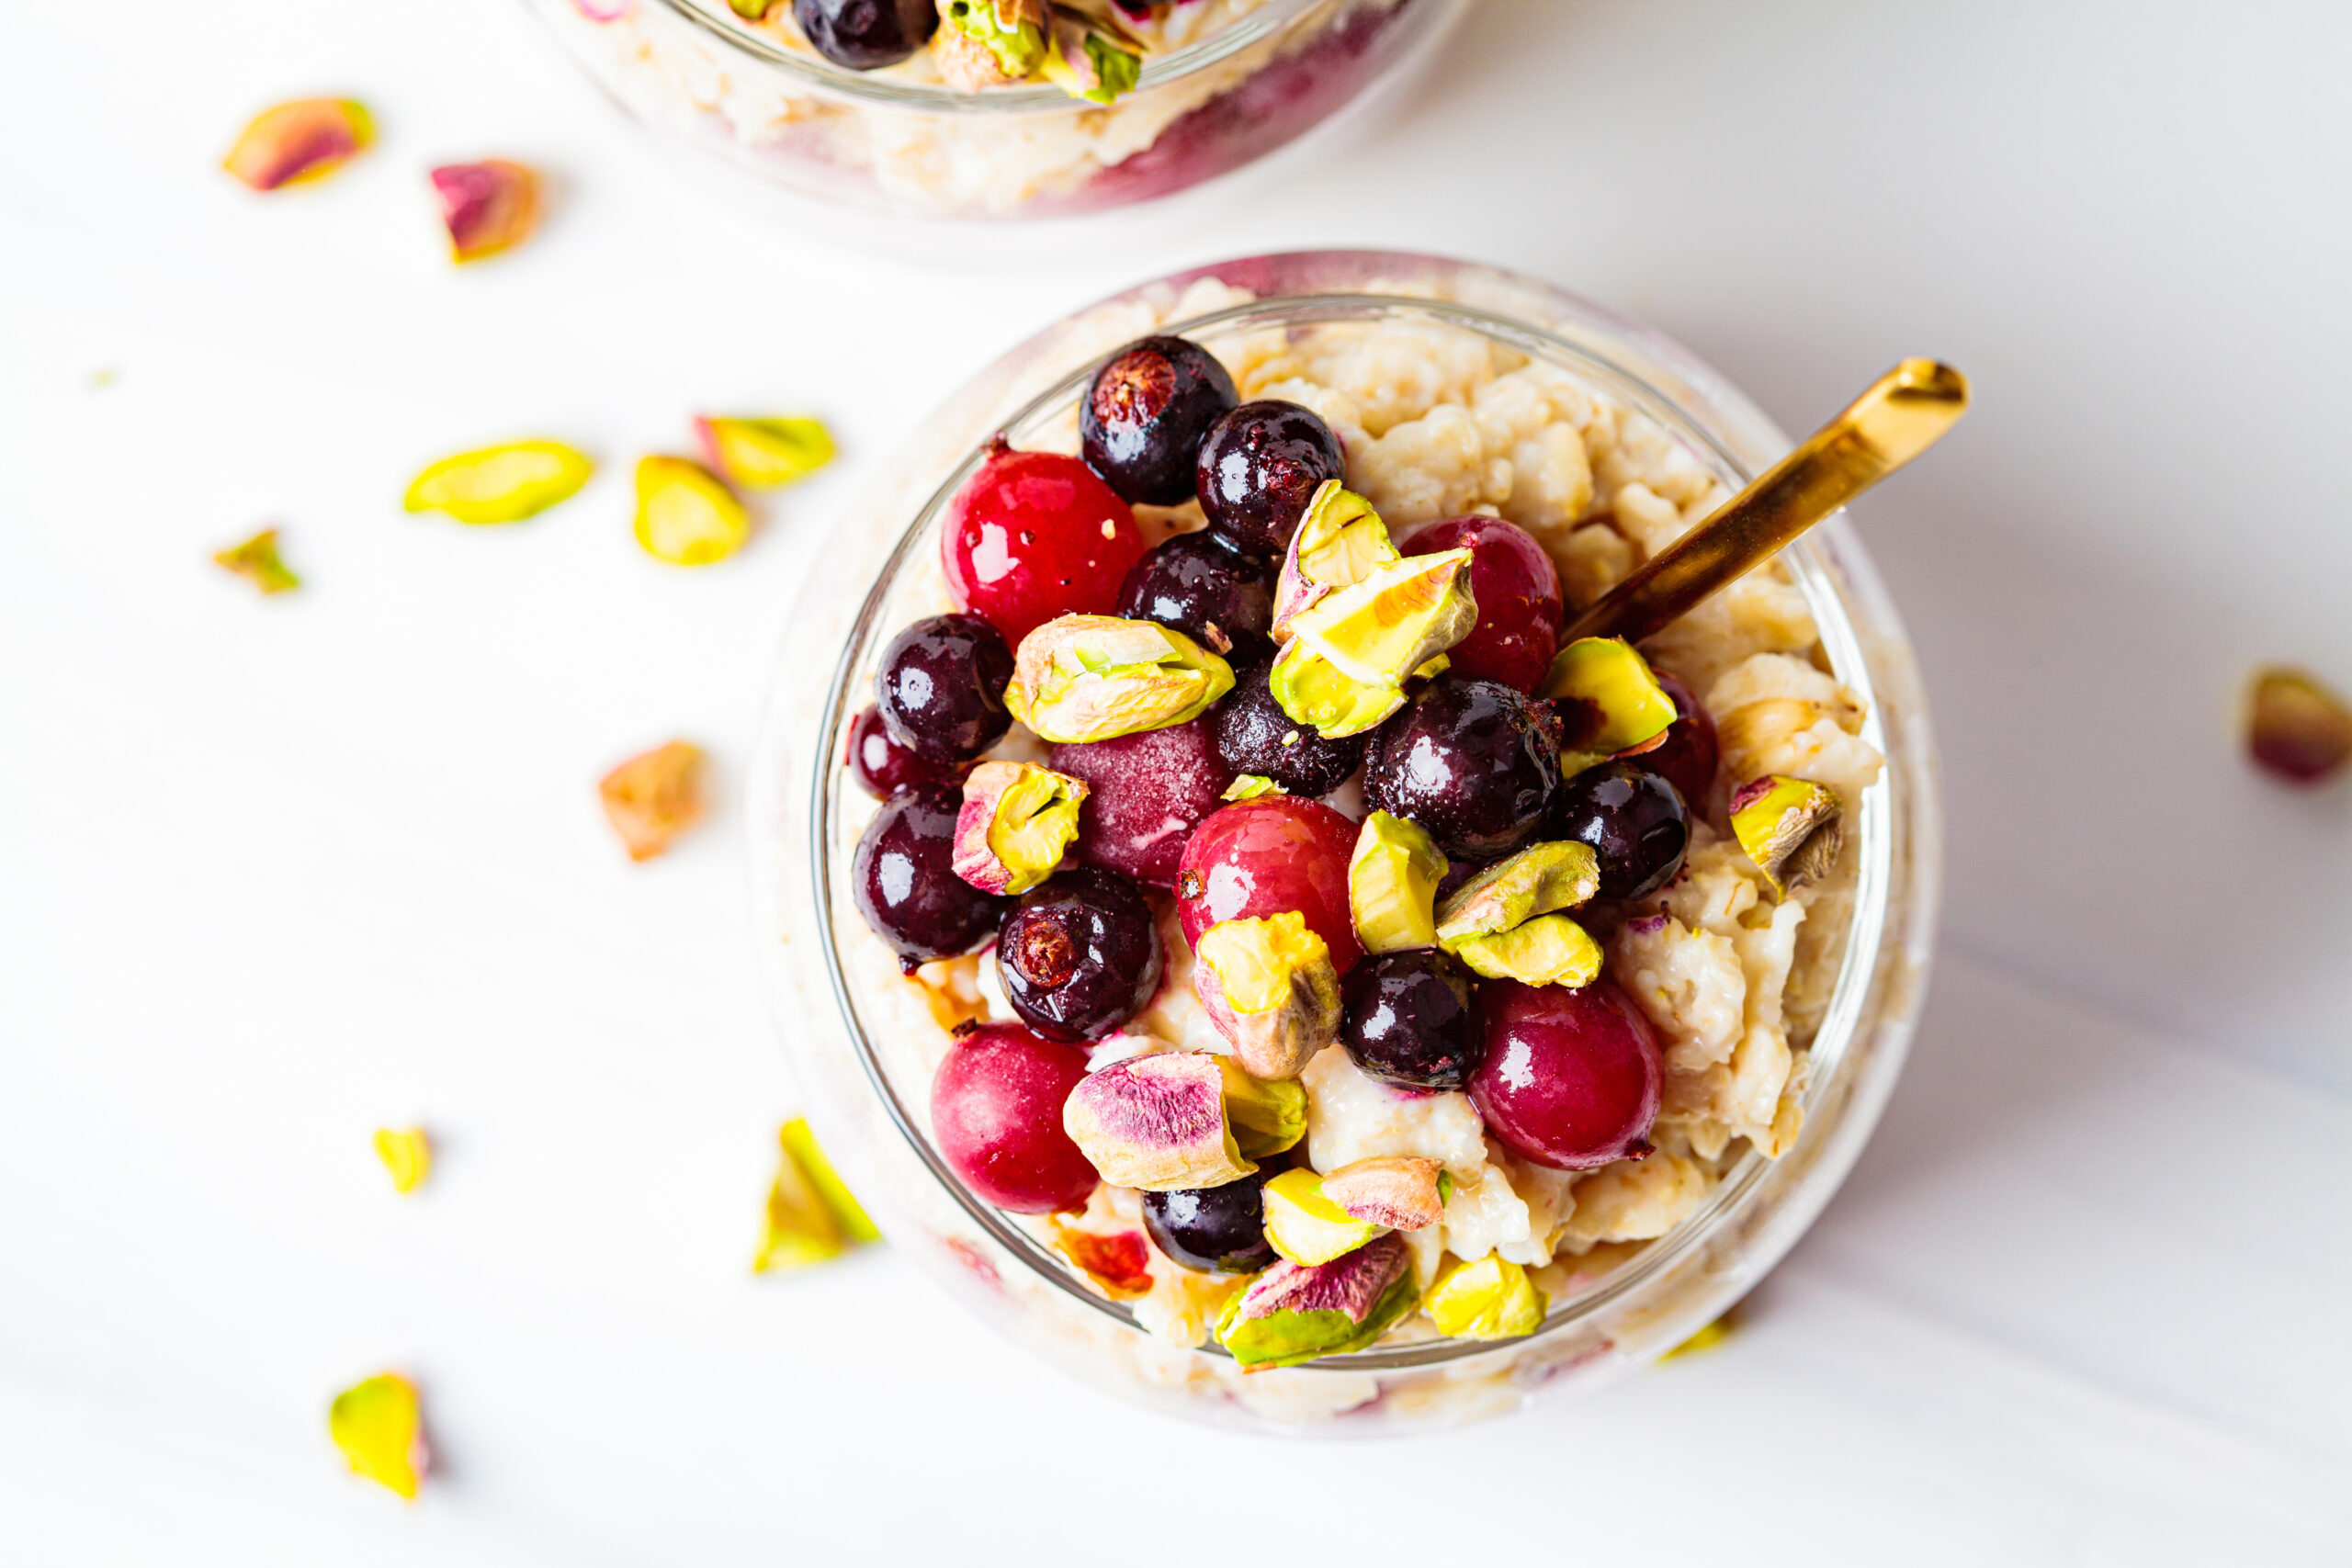 Featured image for “Elevated Overnight Oats”